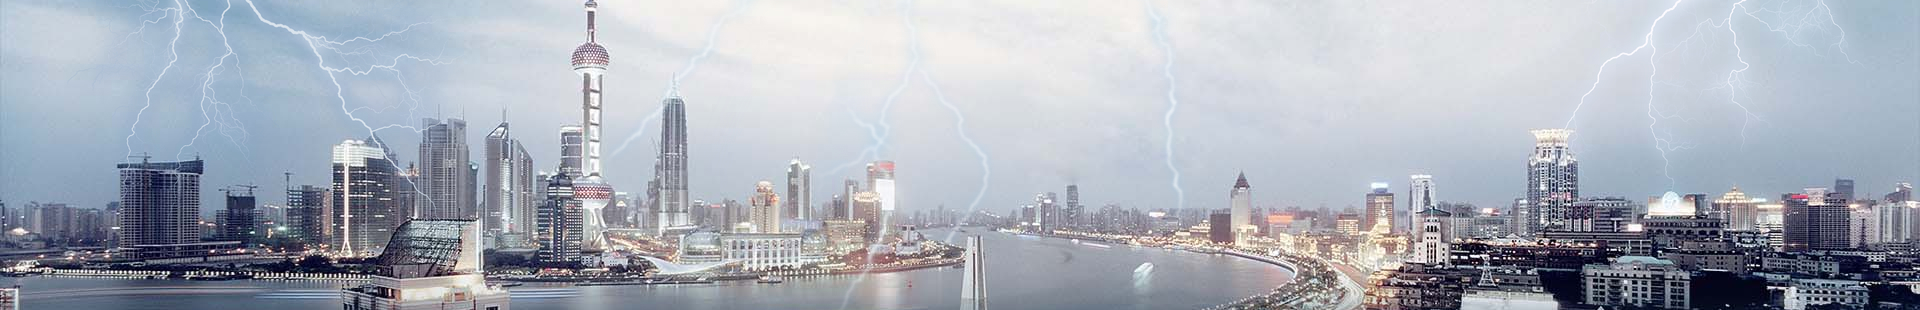 Transmission line lightning harm, causes and protective measures